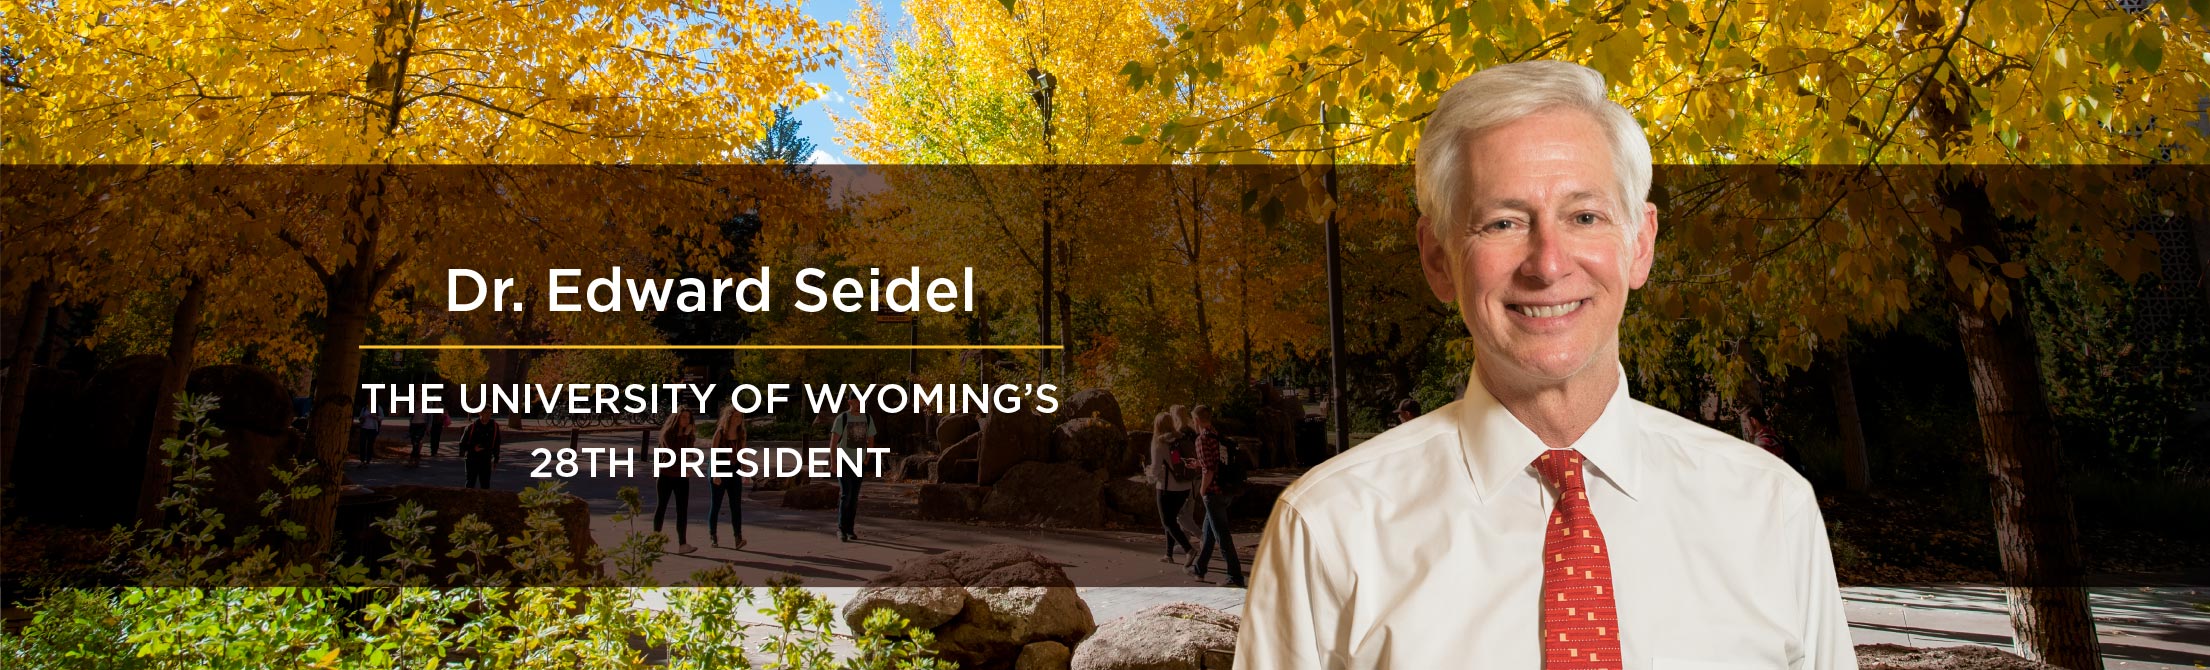 Introducing Dr. H. Edward Seidel. The University of Wyoming’s 28th President